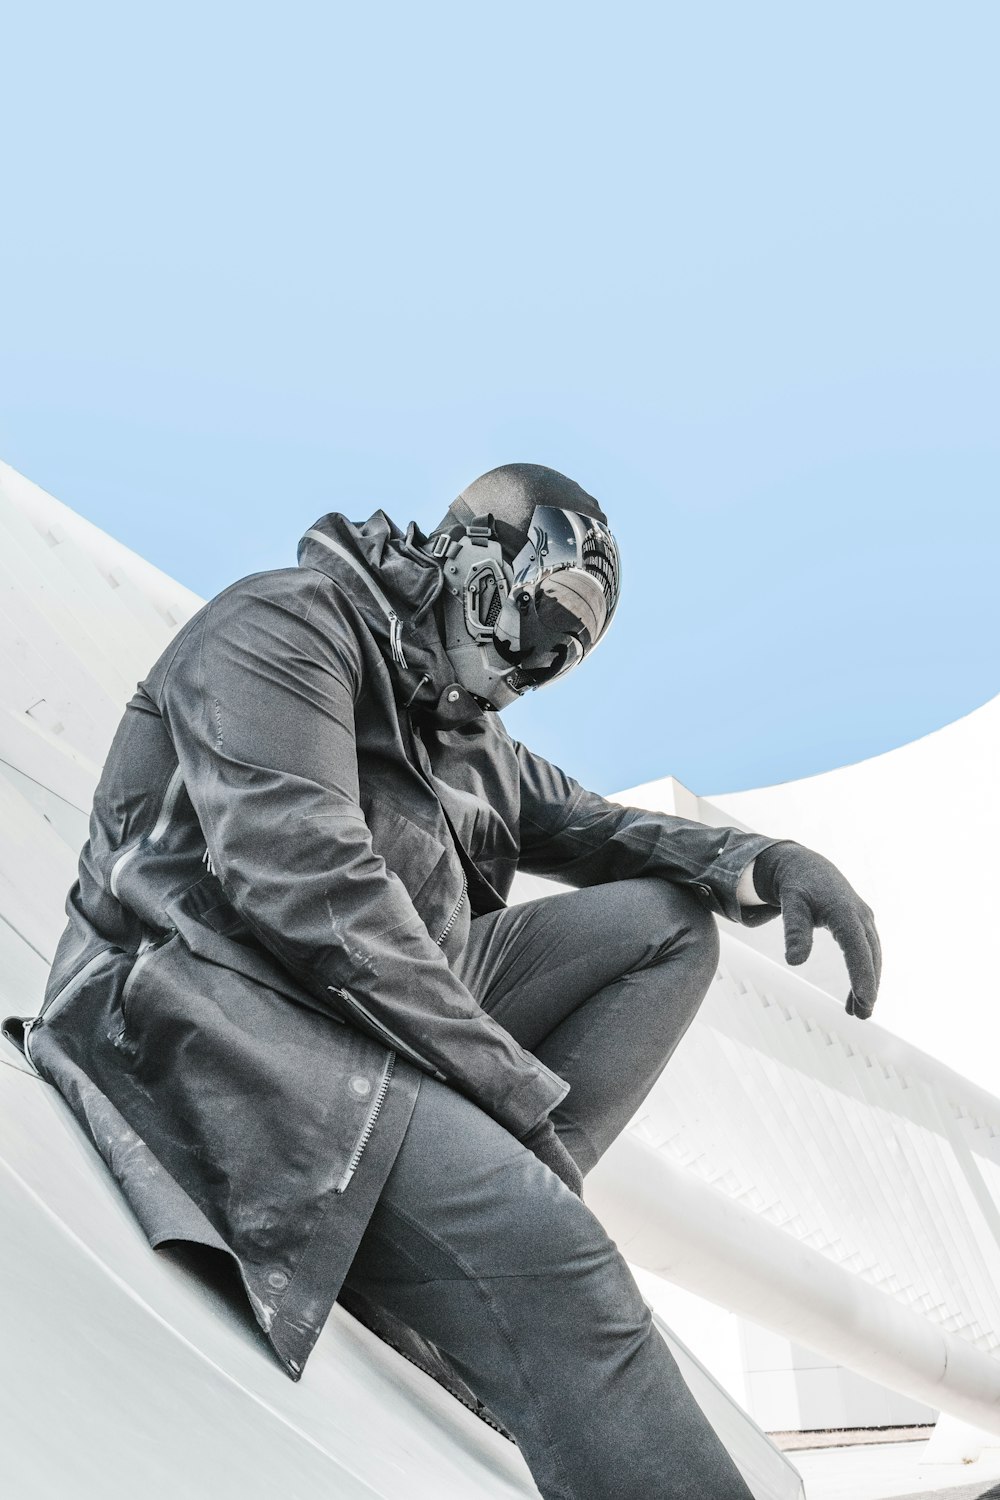 a statue of a man wearing a helmet and goggles